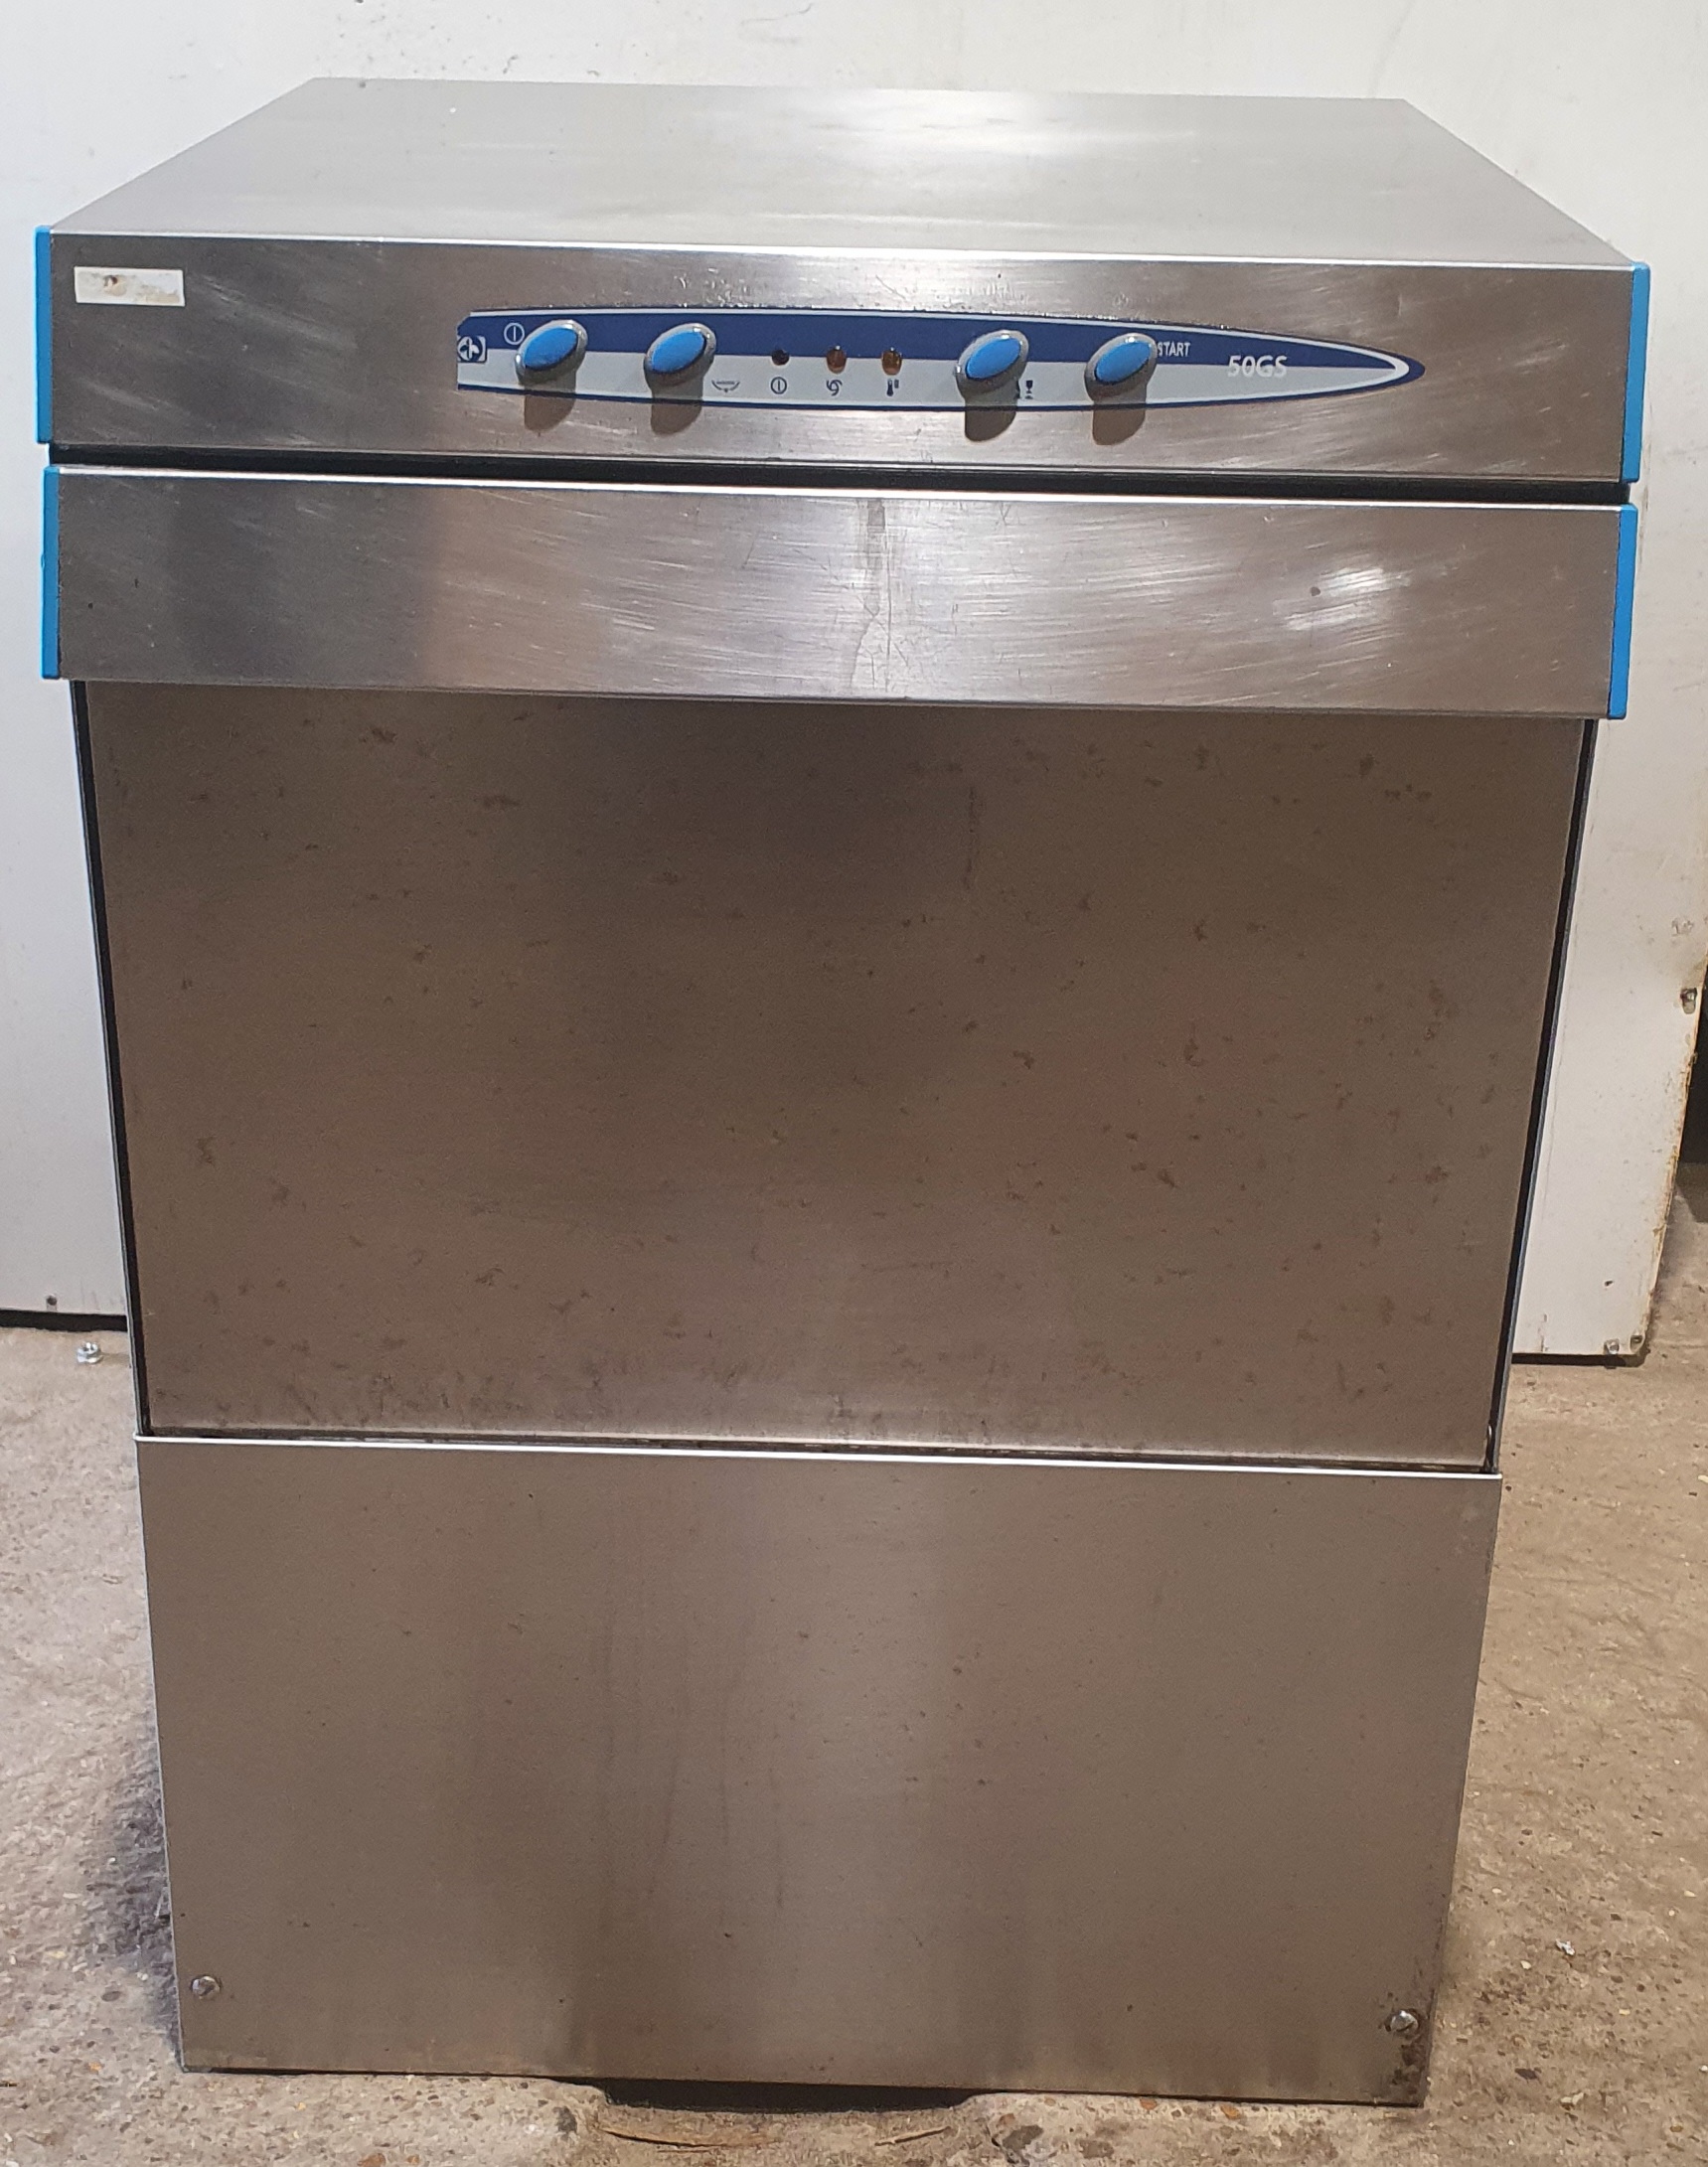 CLASSIC 50GD Under Counter Dish Washer with Drain Pump